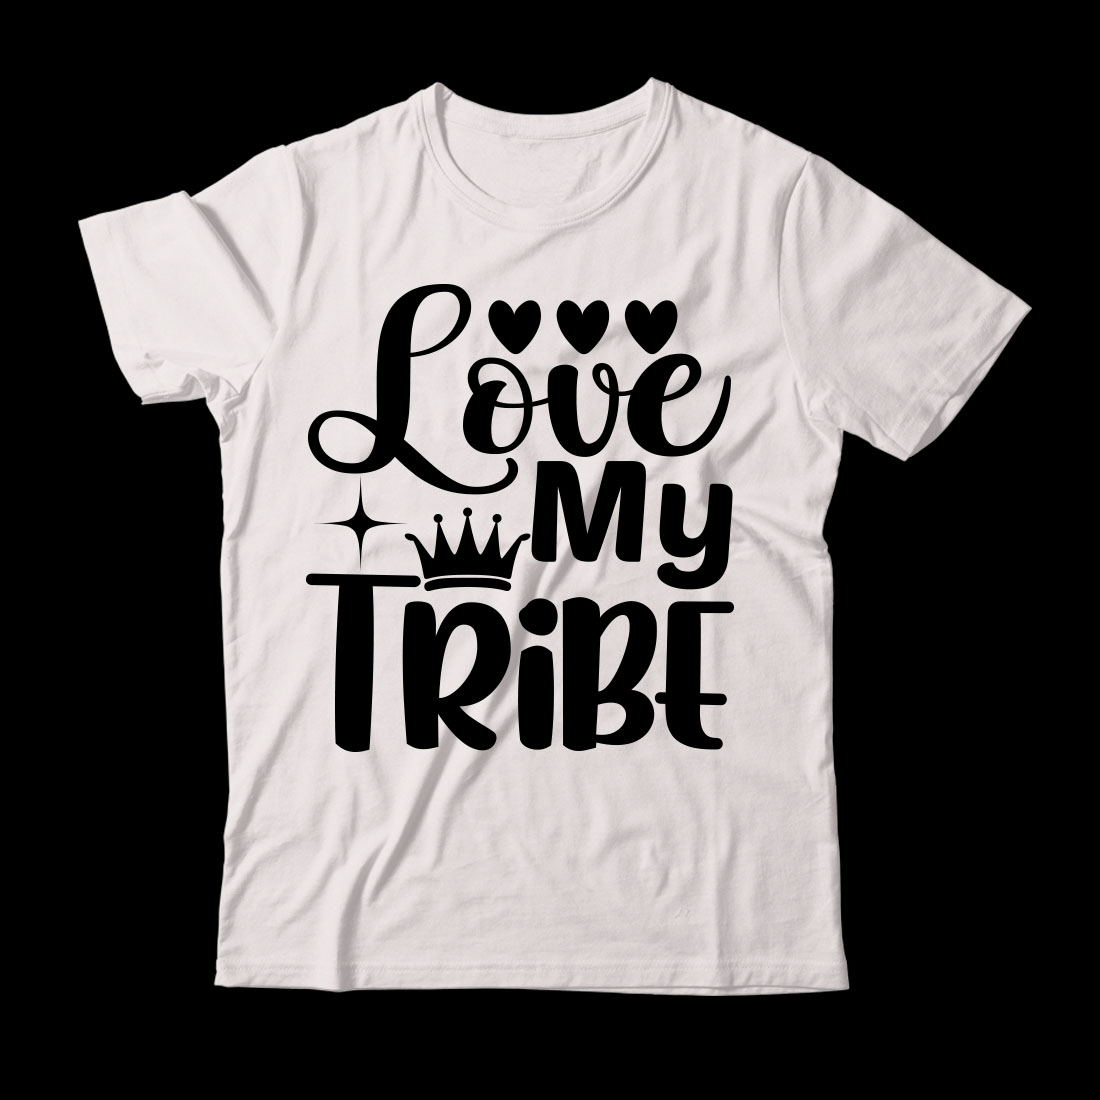 White t - shirt that says love my tribe.